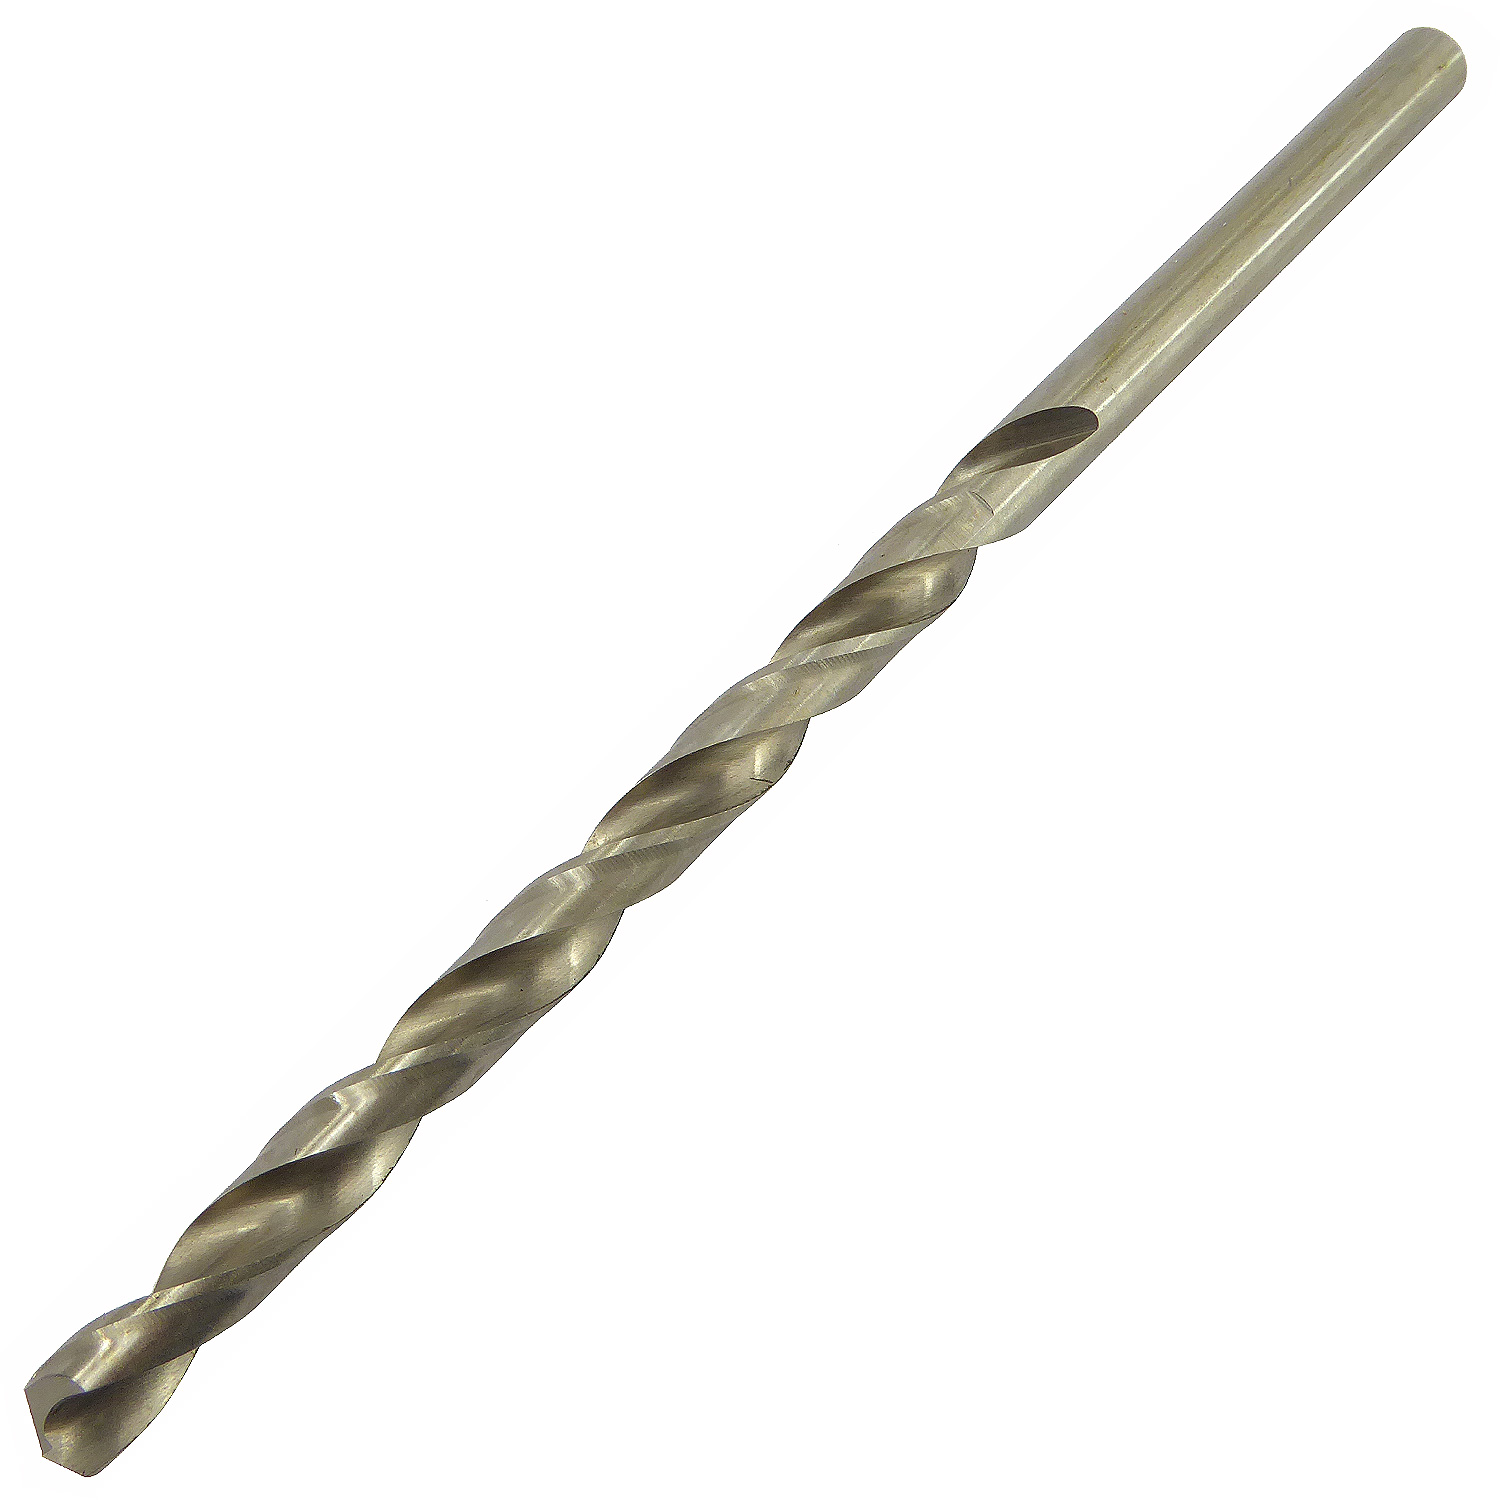 8.5mm x 165mm Long Series Ground Twist Drill Pack of 5